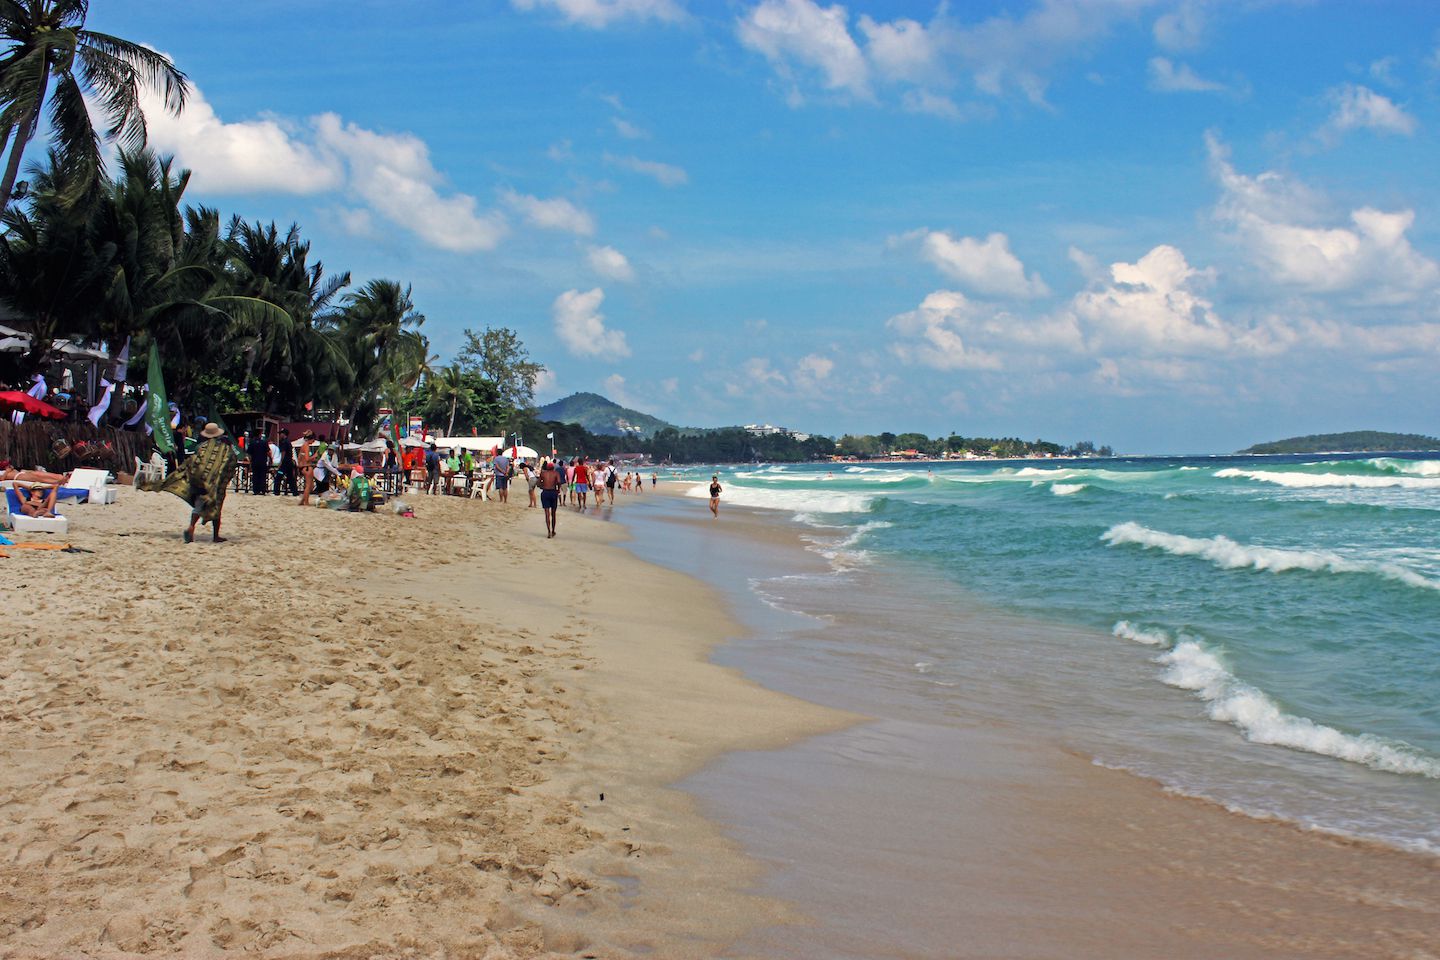 View of the Chaweng Beach in Koh Samui, Thailand